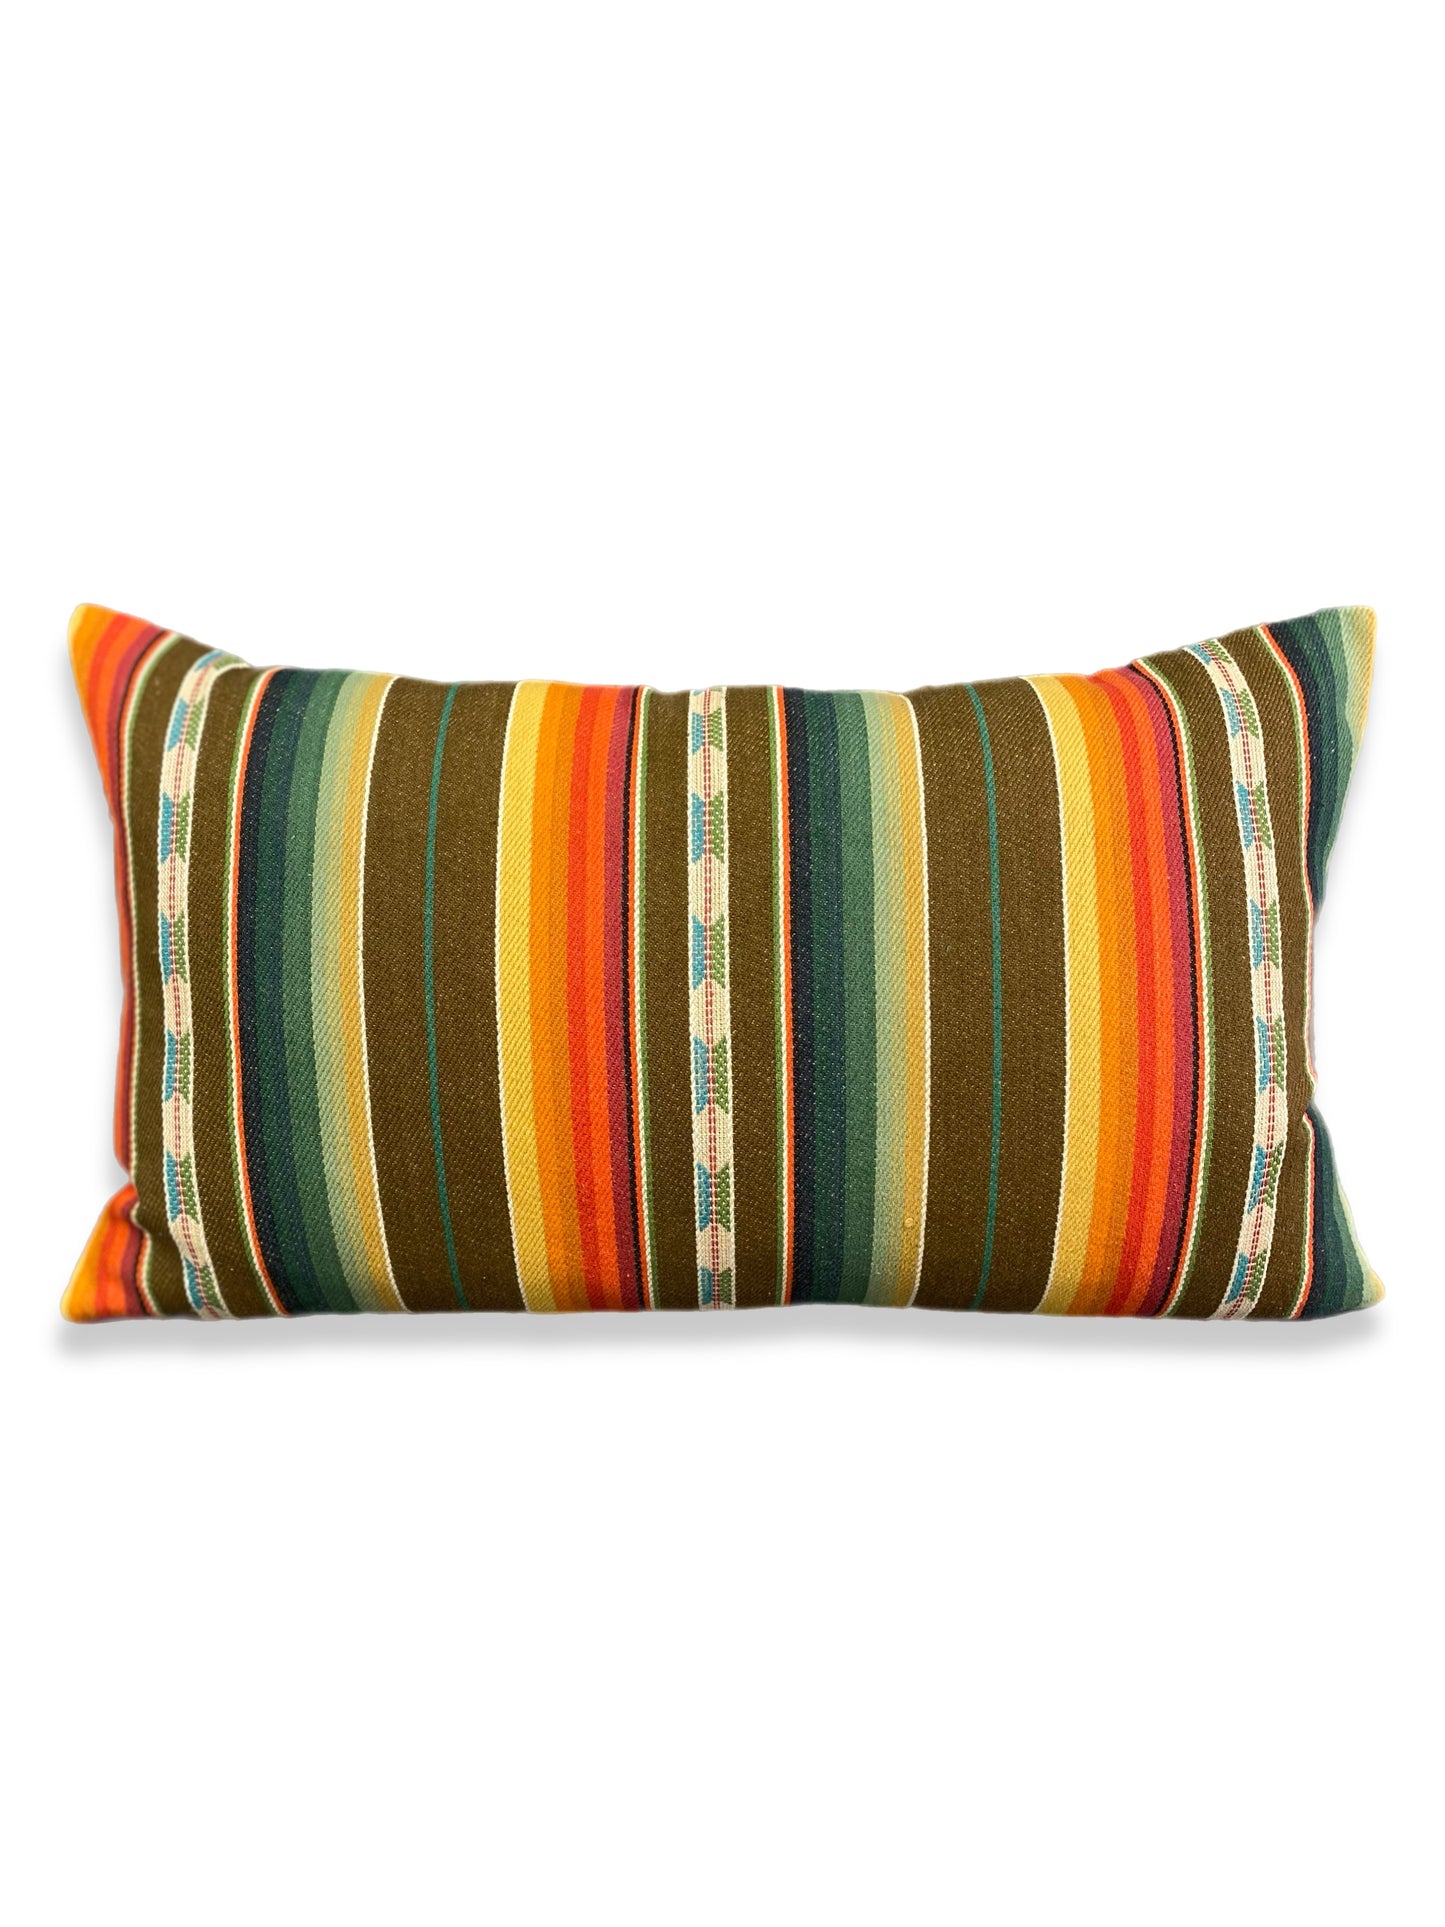 Luxury Lumbar Pillow - 24" x 14" - Native-Earth; Native motifs beautifully woven amongst stripes of brown, black, tans, yellows, greens, blues, and reds